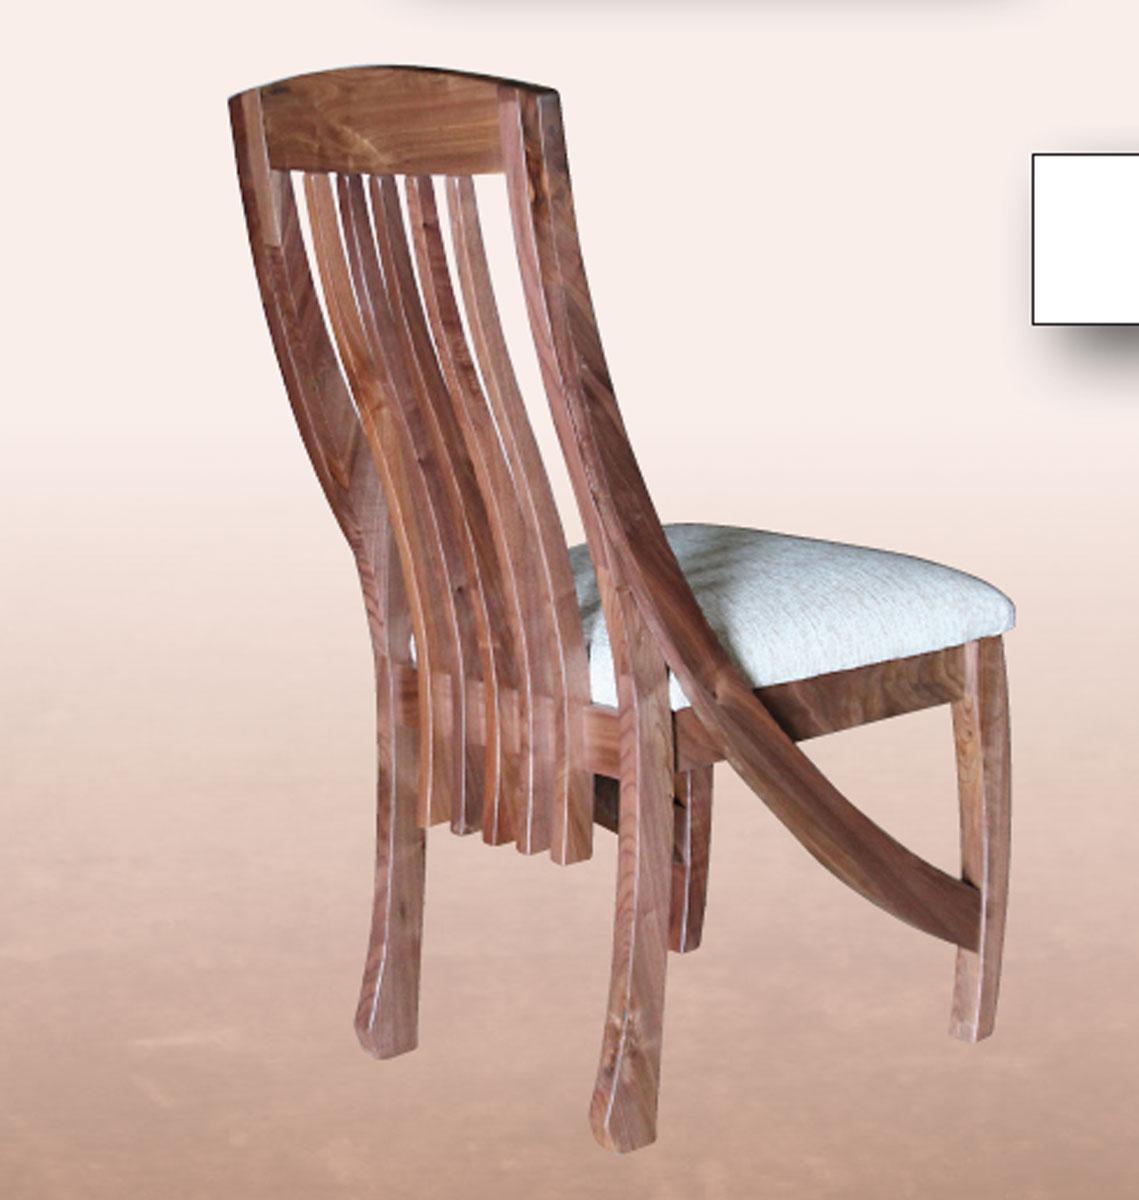 Back View of the Key West Dining Chair